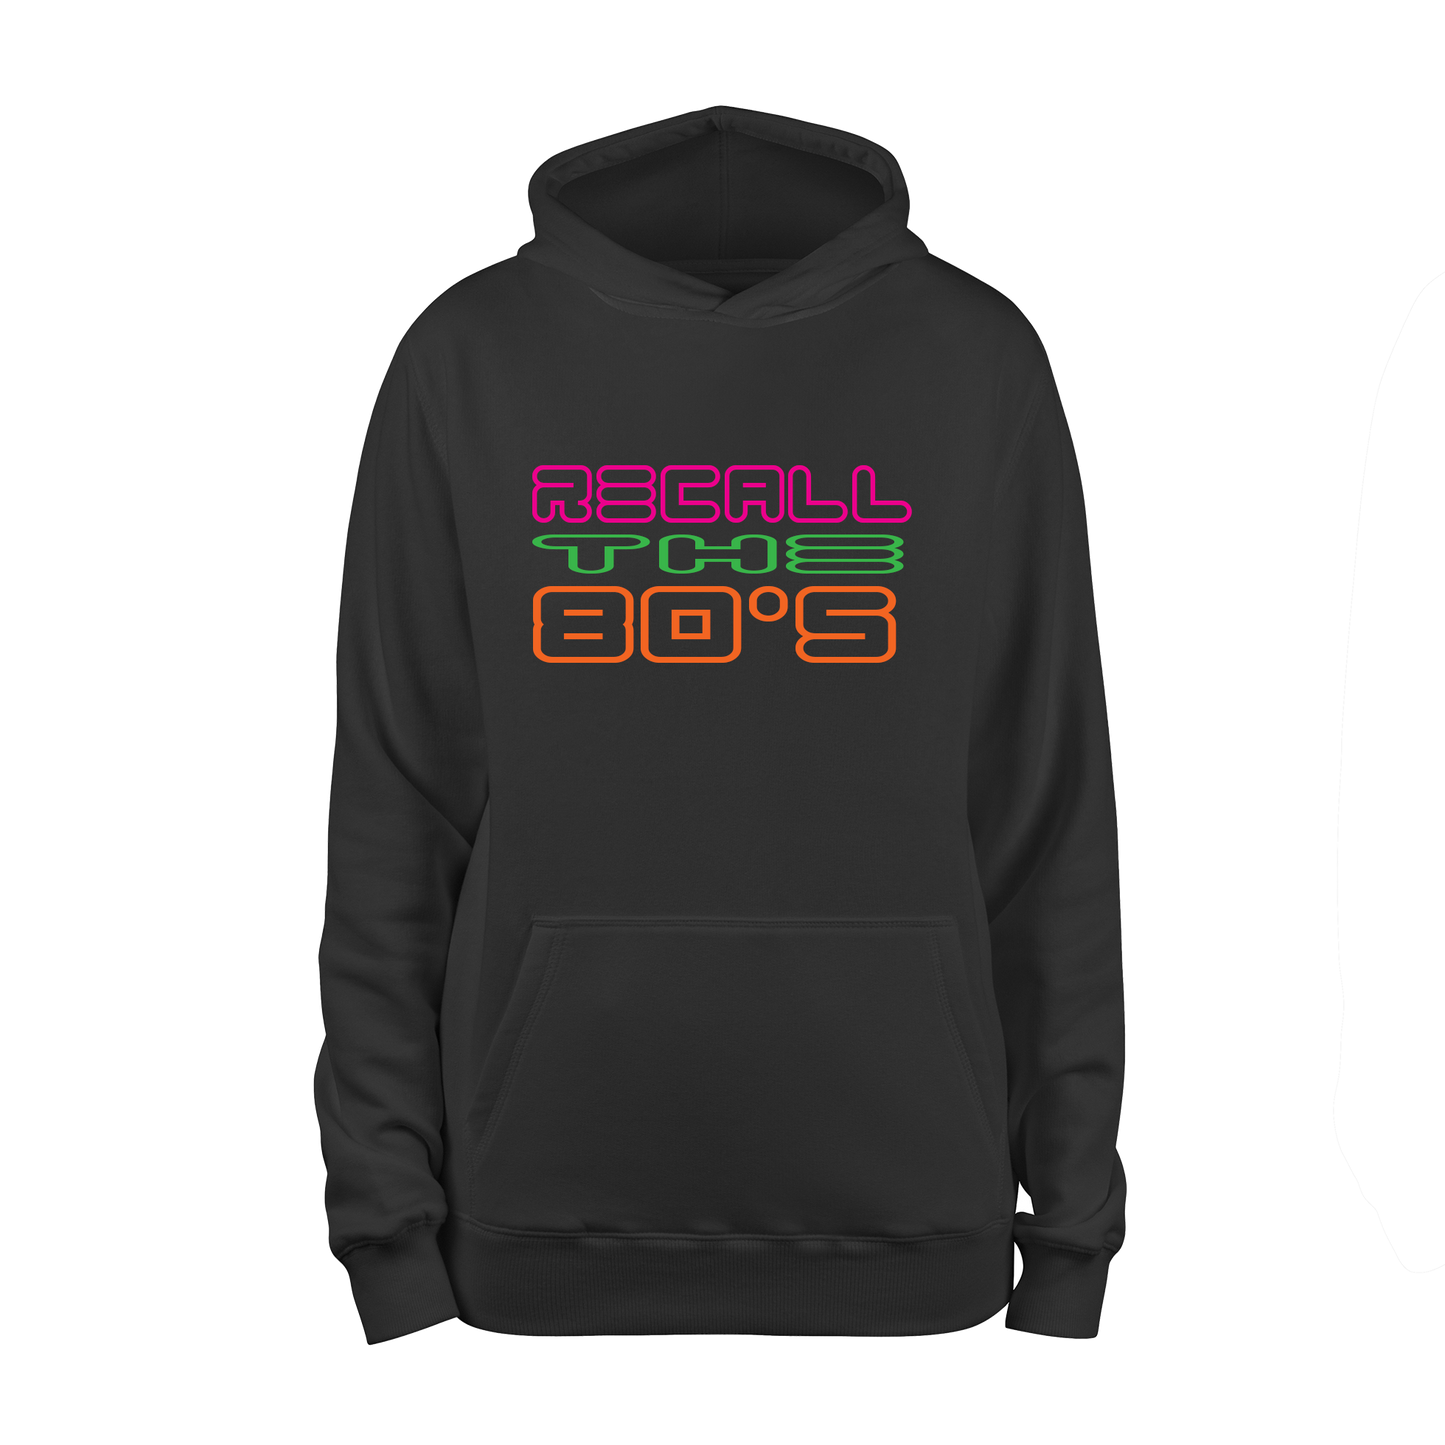 Recall the 80's Merch - Unisex Hoodie Jumper - AVAILABLE ONLINE ONLY - You’ve Got Me In Stitches